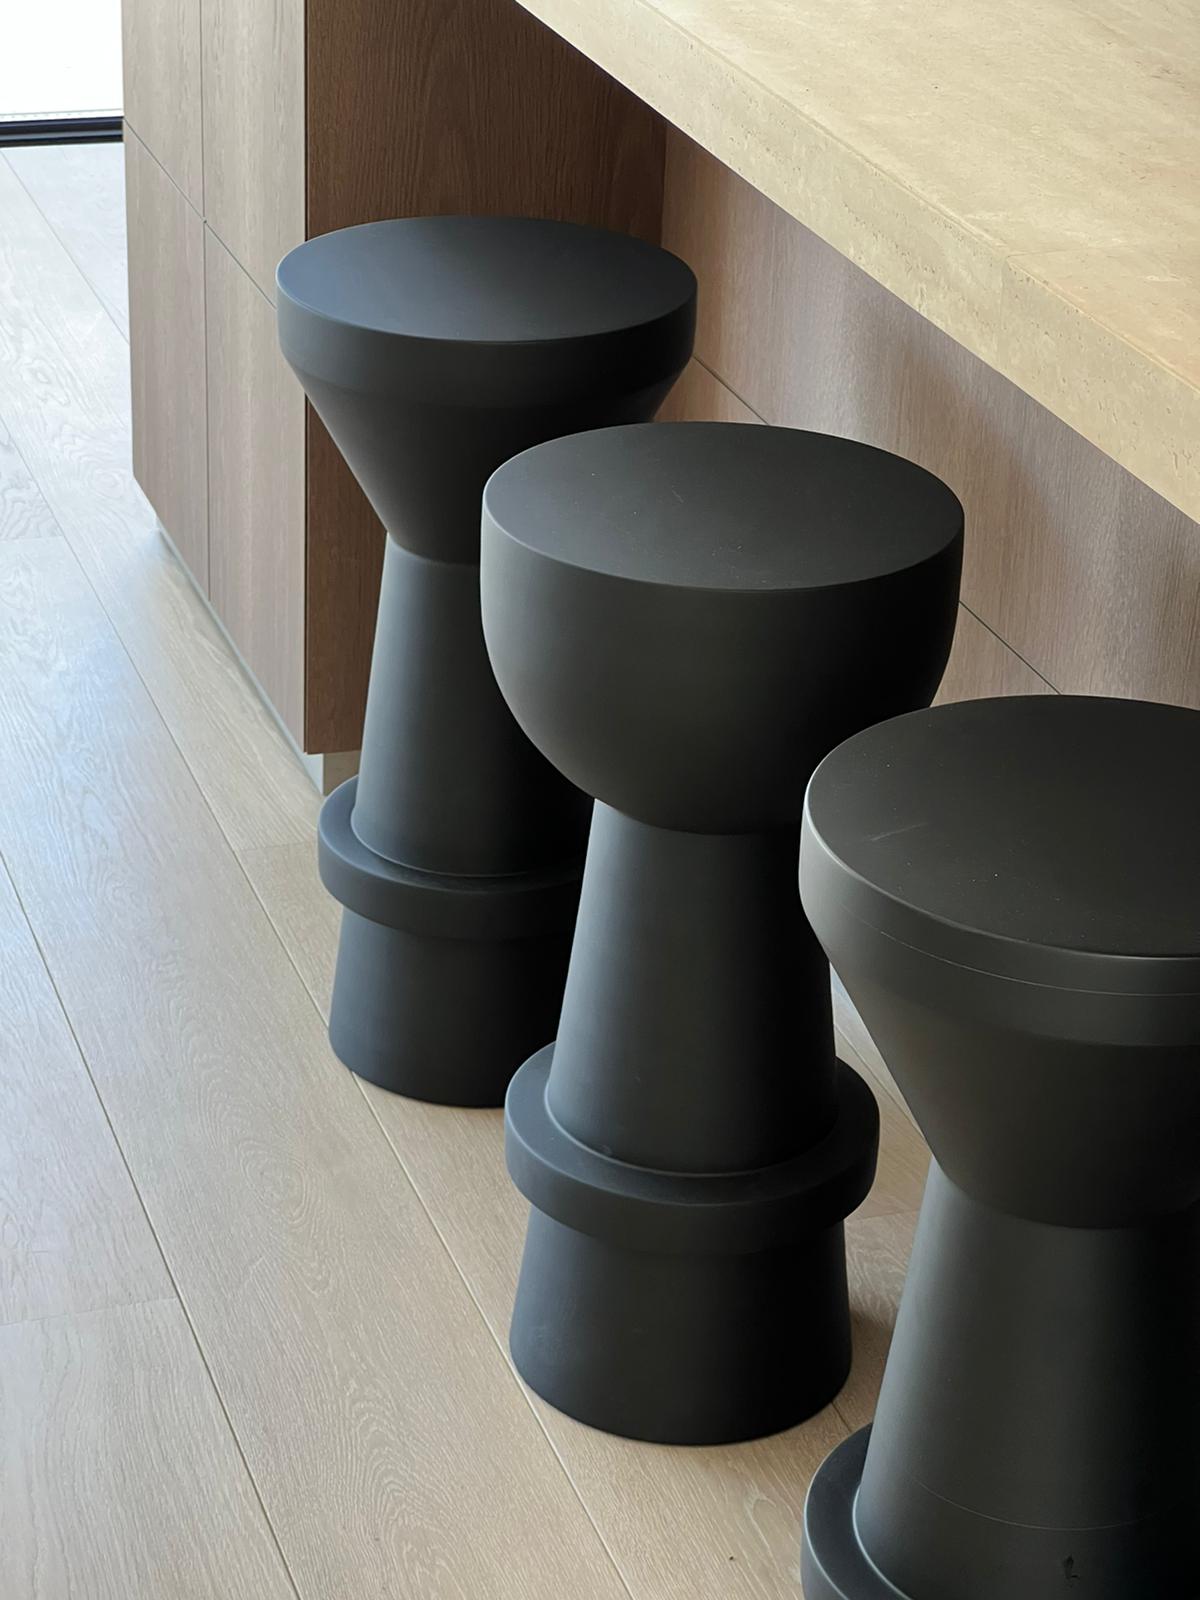 CHESS STOOLS BY FELIX MILLORY DESIGN